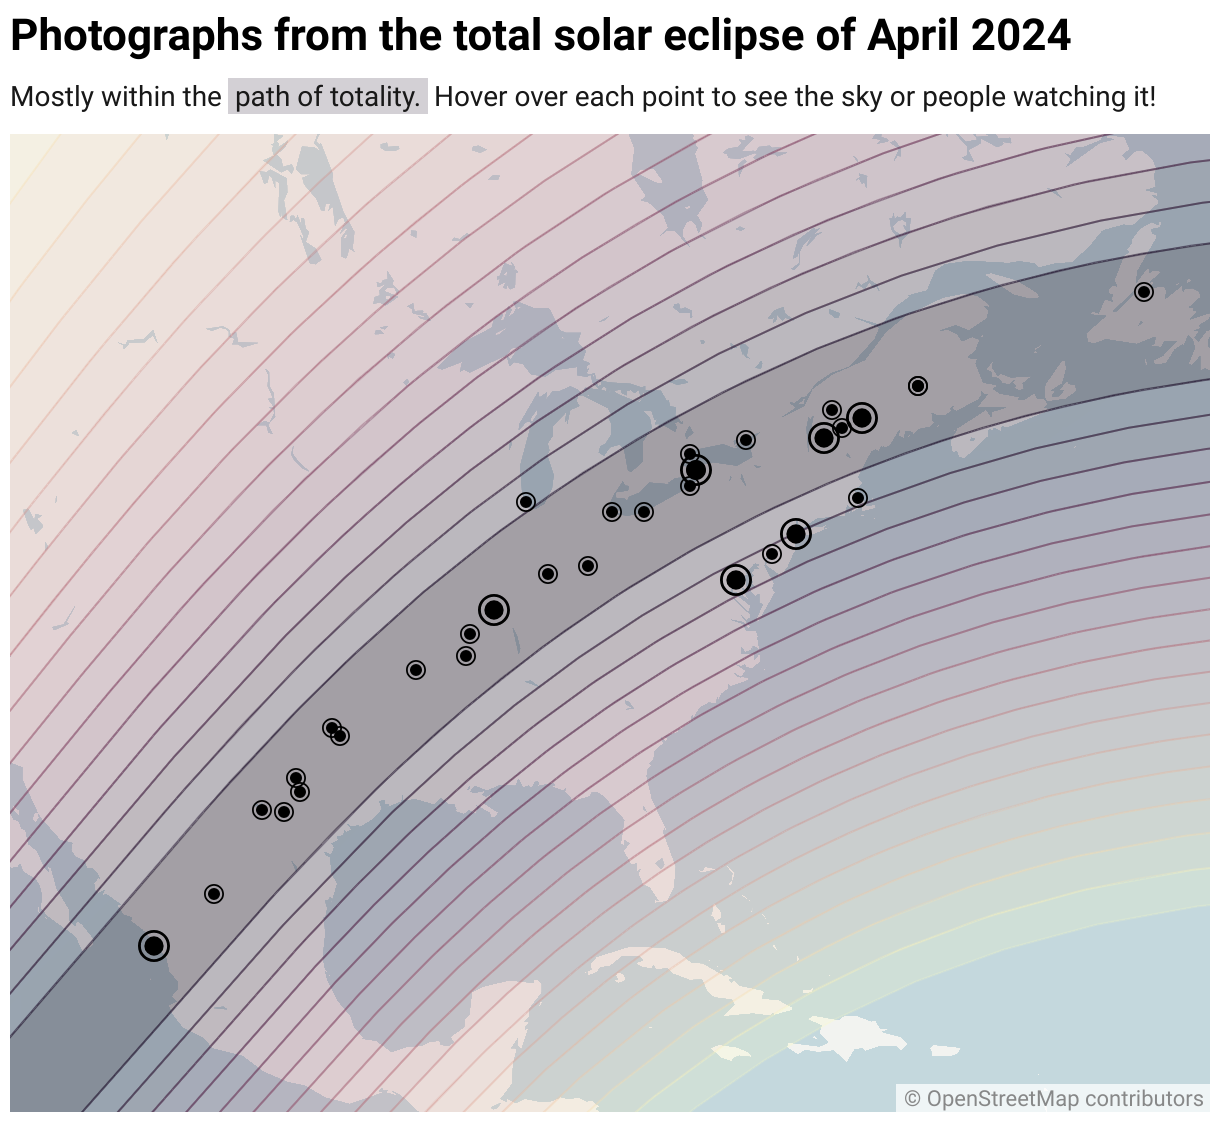 Photographs from the total solar eclipse of April 2024 